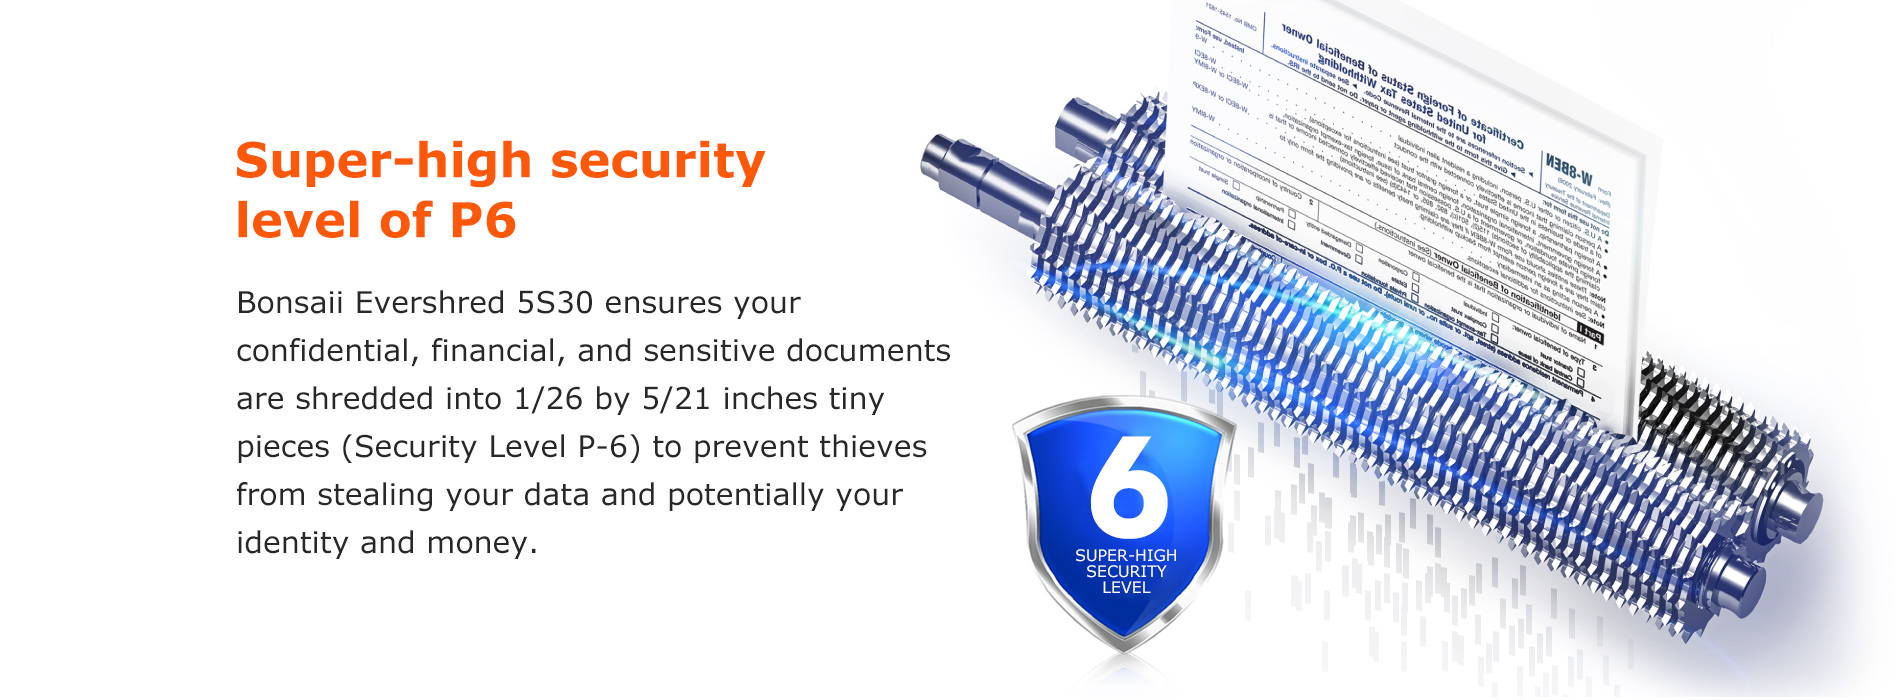 Super-high security level of P6 Bonsaii Evershred 5S30 ensures your confidential, financial, and sensitive documents are shredded into 1/26 by 5/21 inches tiny pieces (Security Level P-6) to prevent thieves from stealing your data and potentially your identity and money.